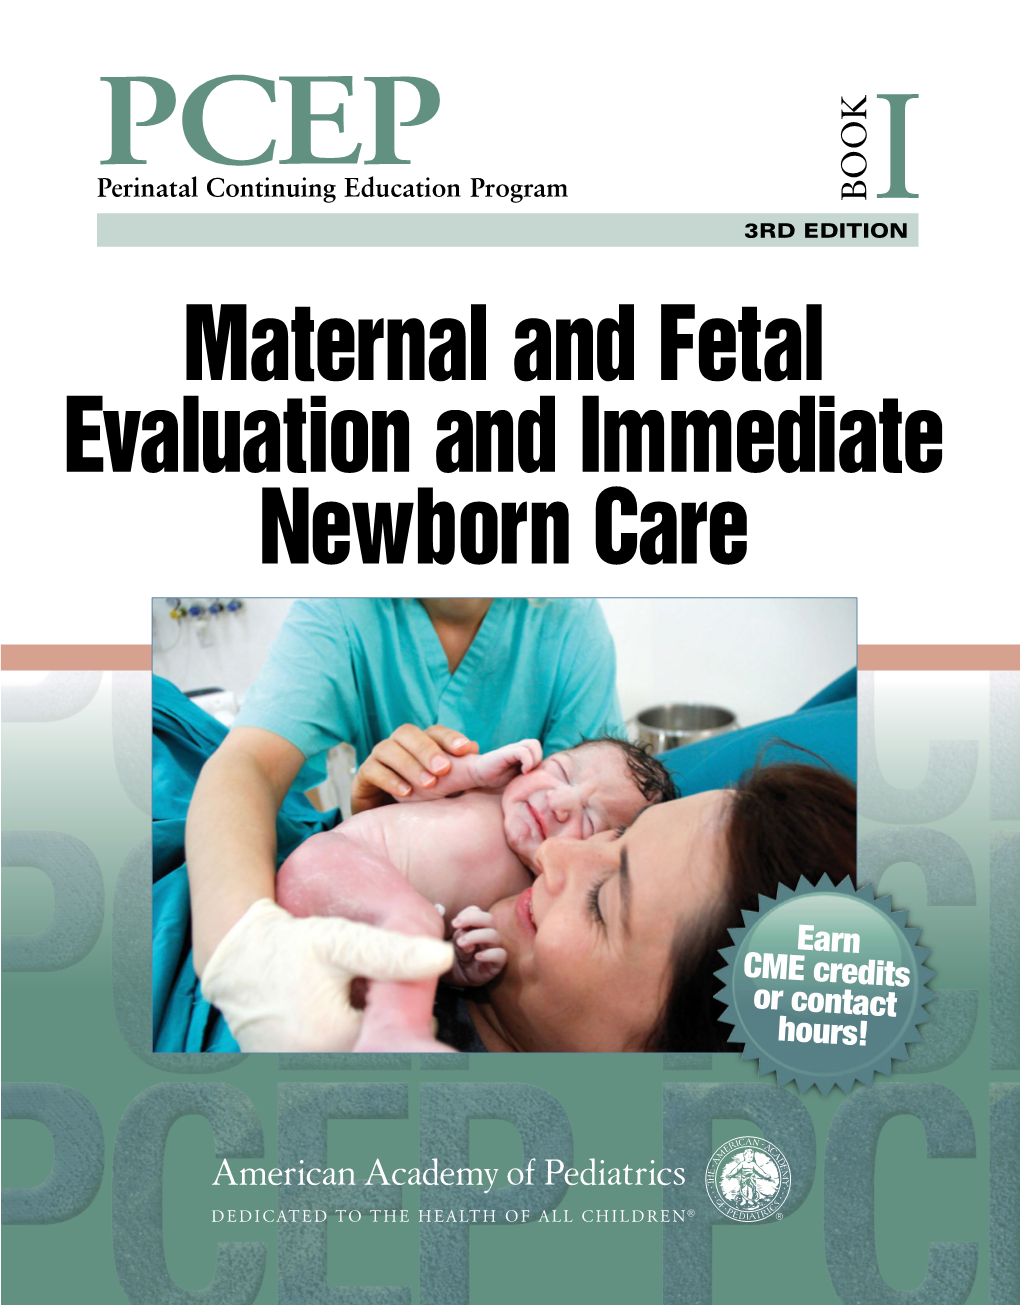 Maternal and Fetal Evaluation and Immediate Newborn Care